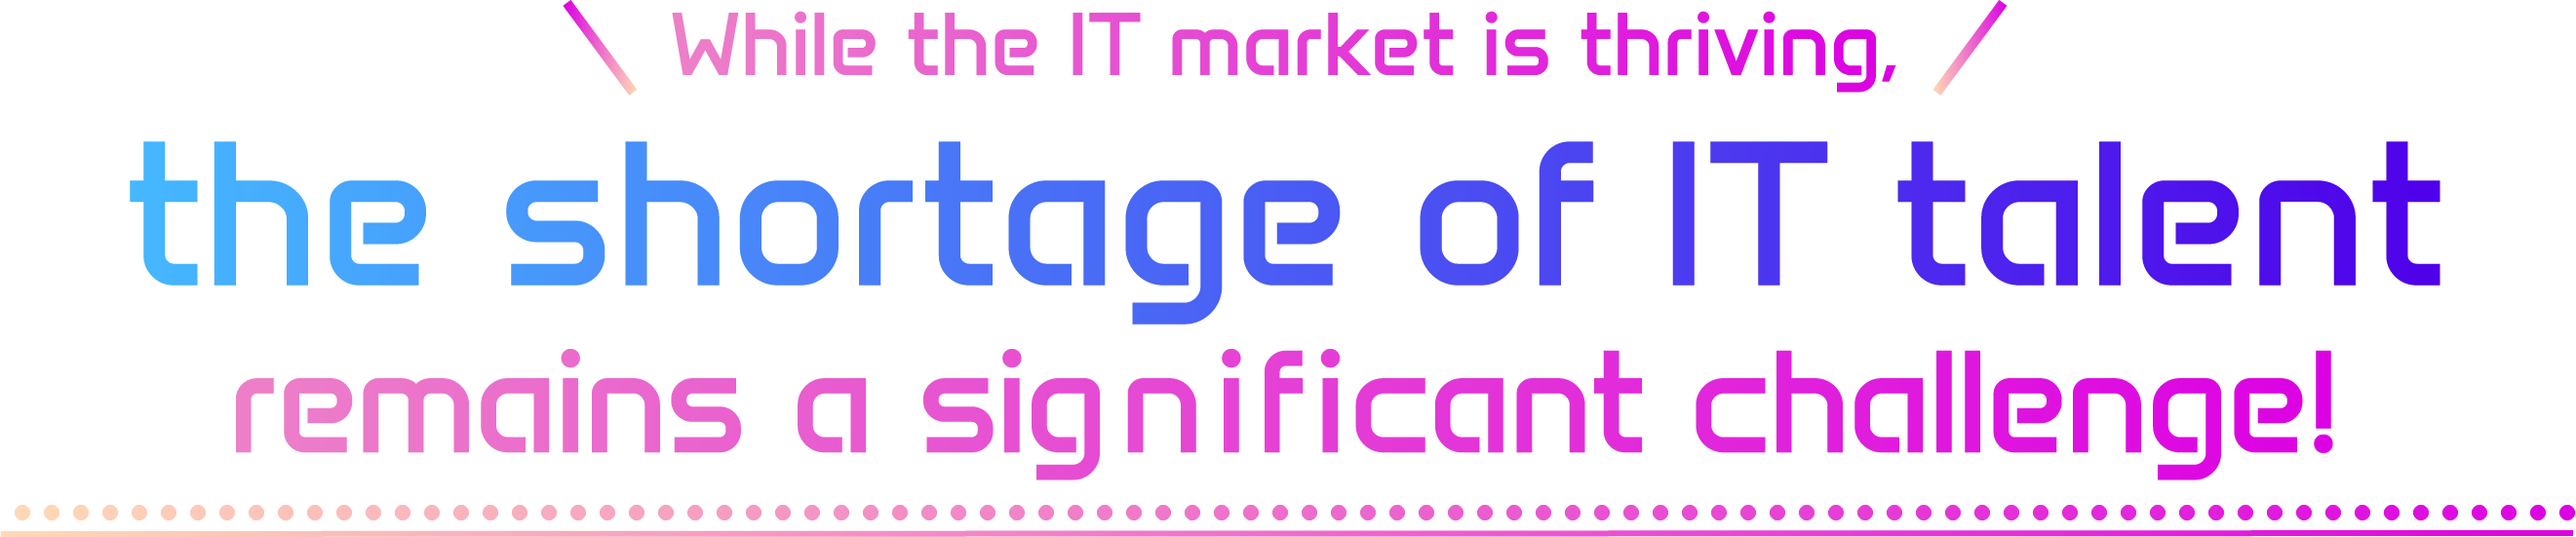 While the IT market is thriving, the shortage of IT talent remains a signif icant challenge!